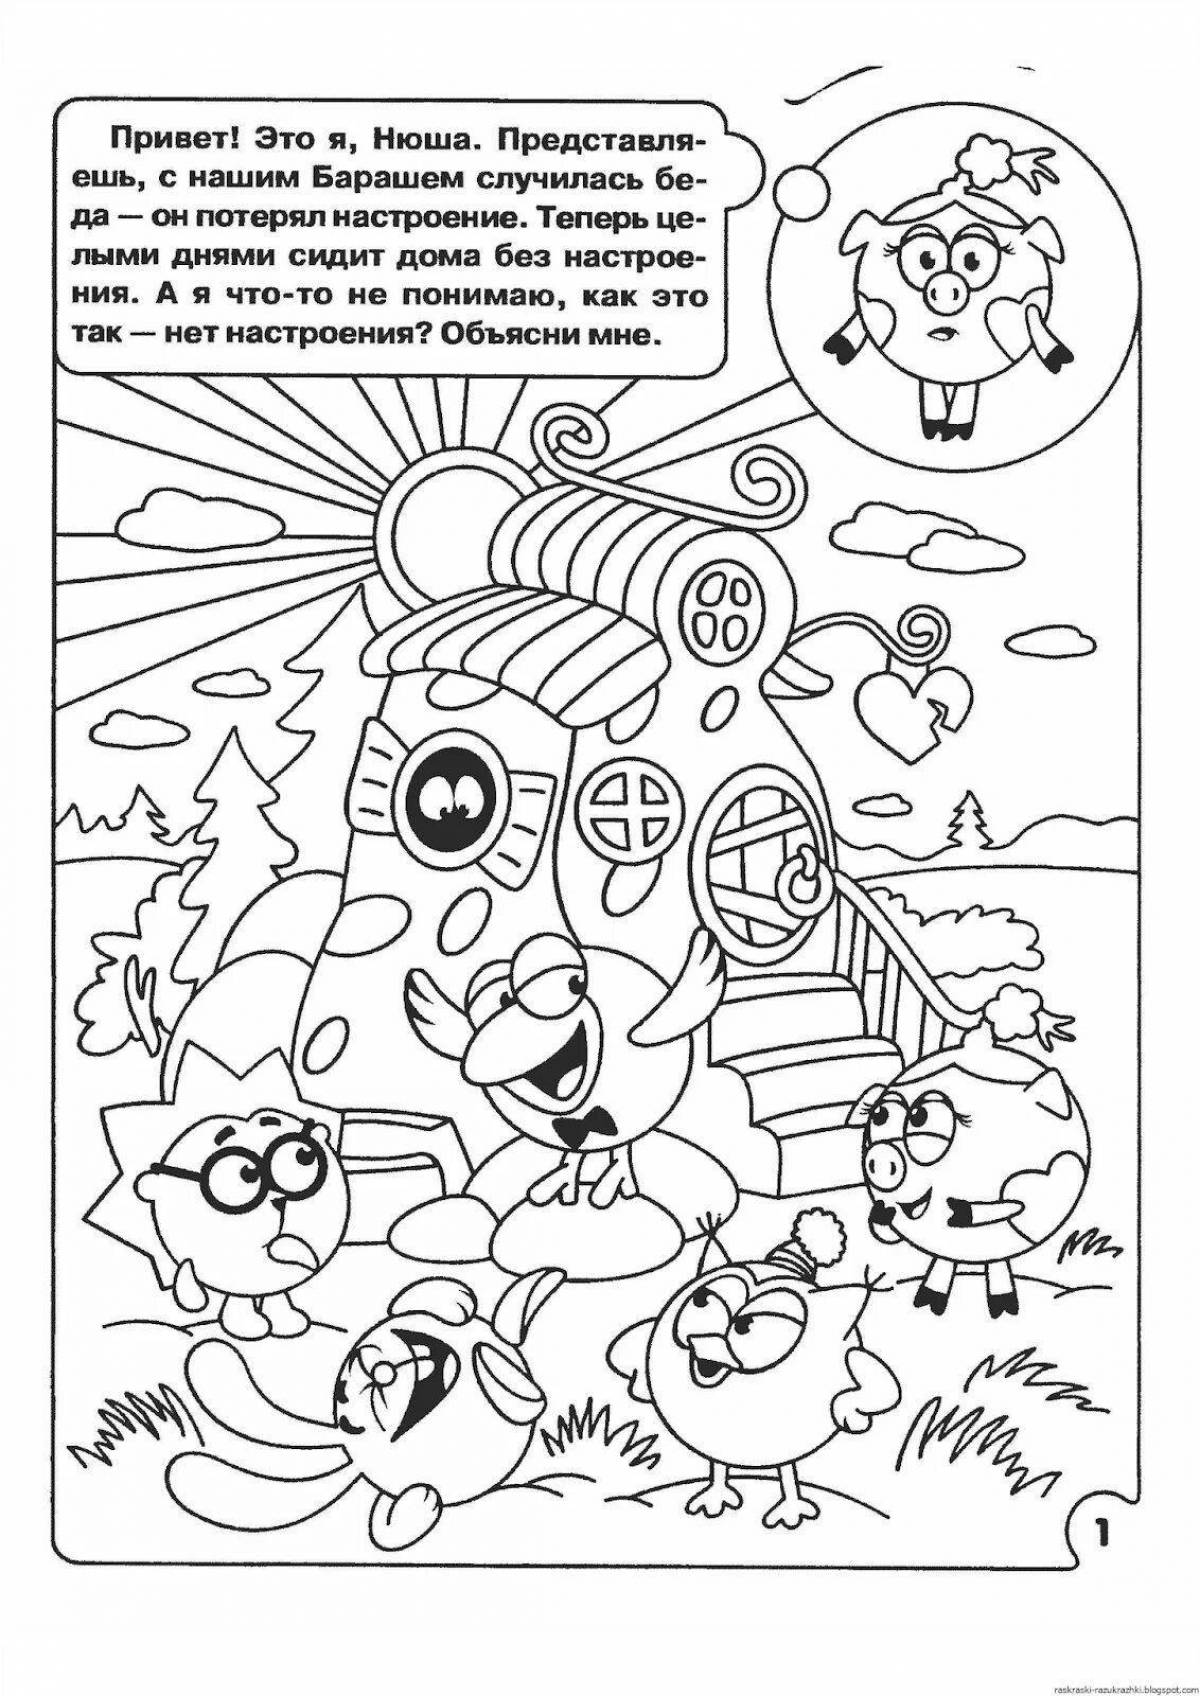 Smeshariki drama complex coloring pages